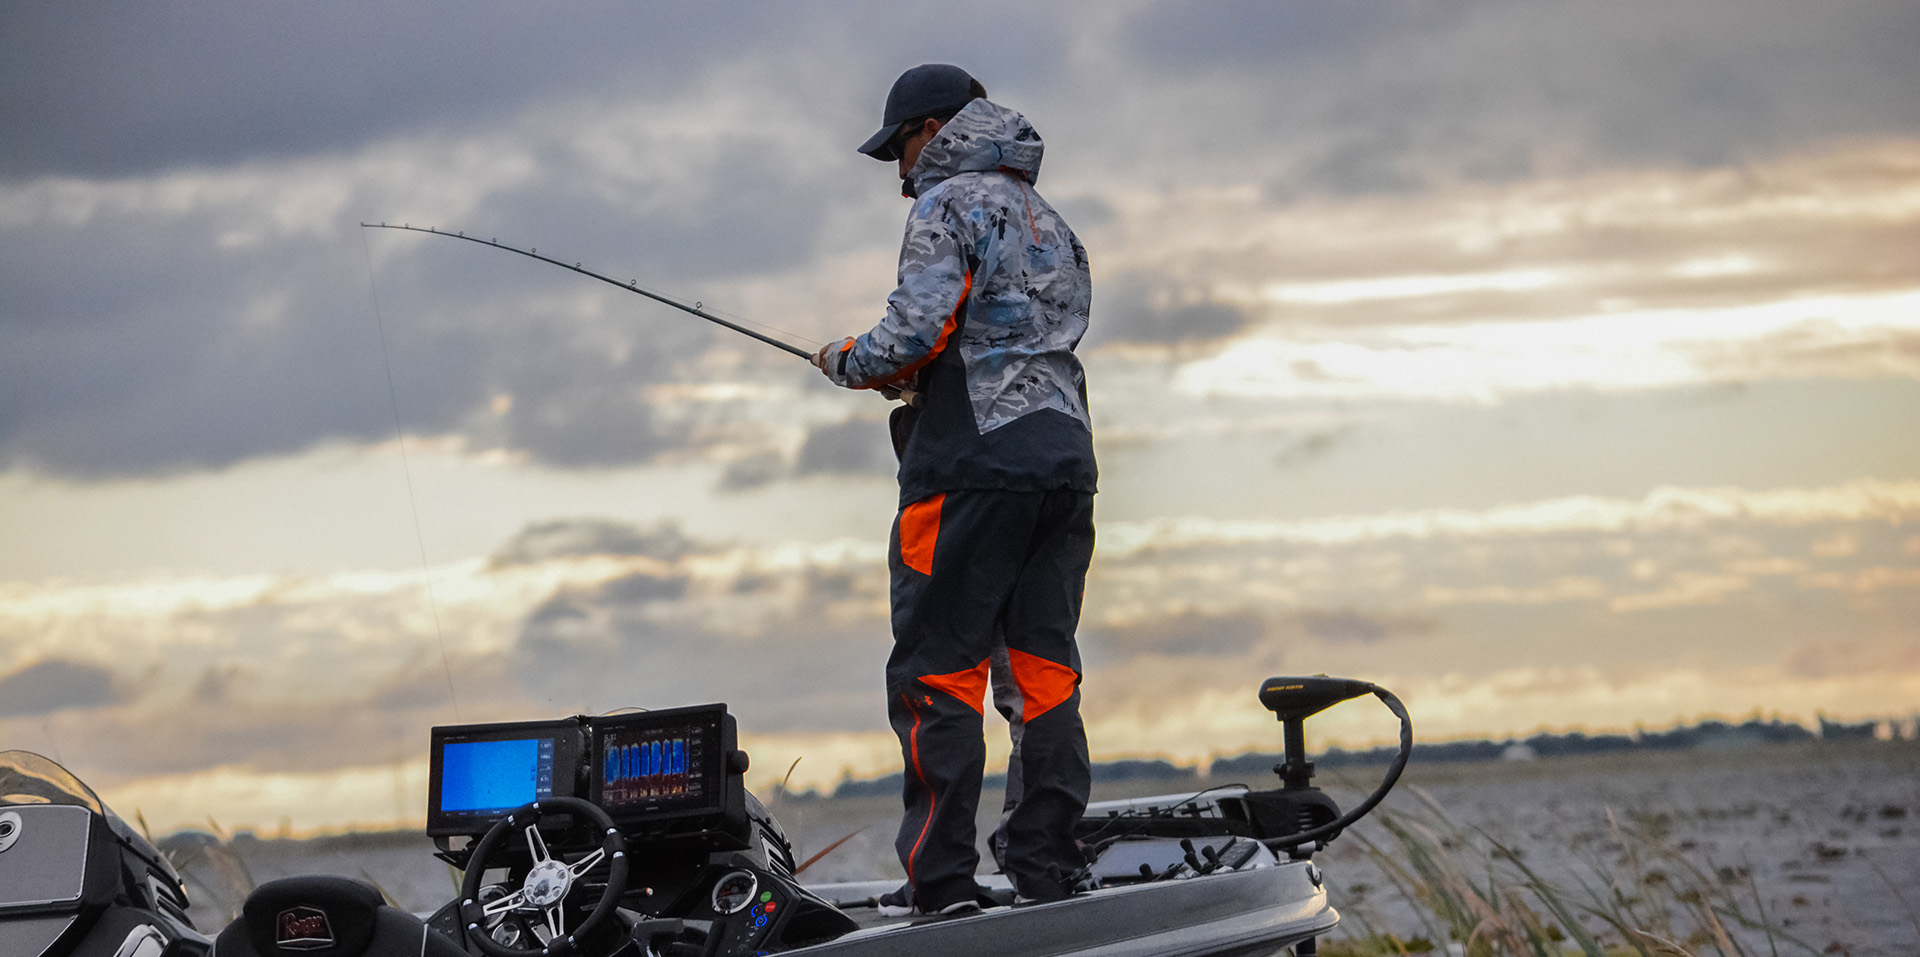 FLW Tour 2016 Rookie of the Year Chris Johnston working at Lake Okeechobee